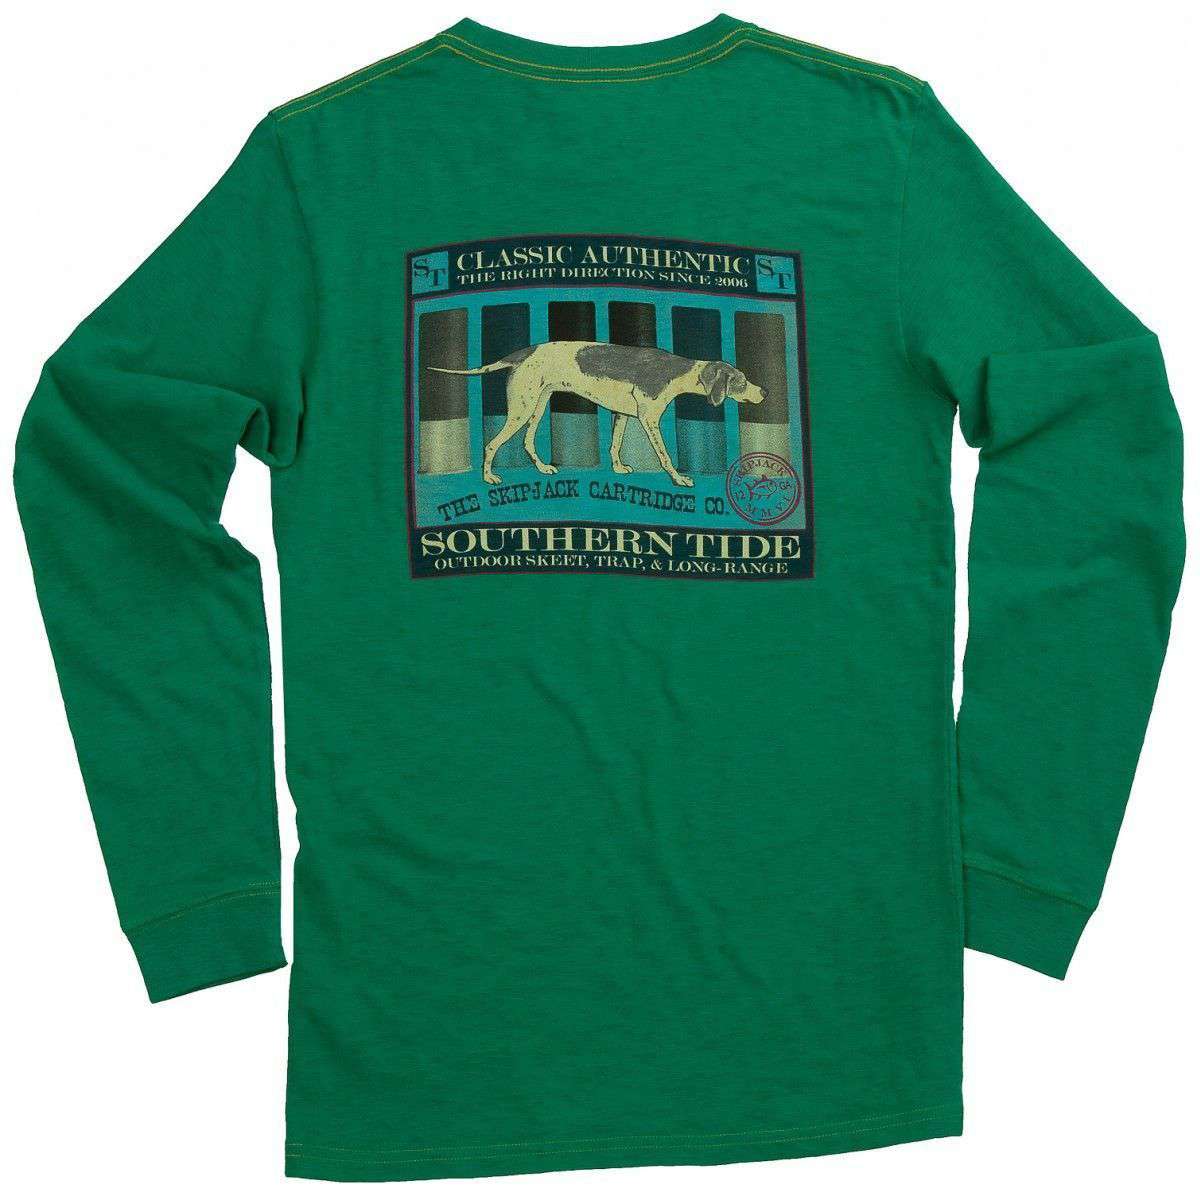 Skipjack Cartridge Co. Long Sleeve T-Shirt in Double Ought Green by Southern Tide - Country Club Prep